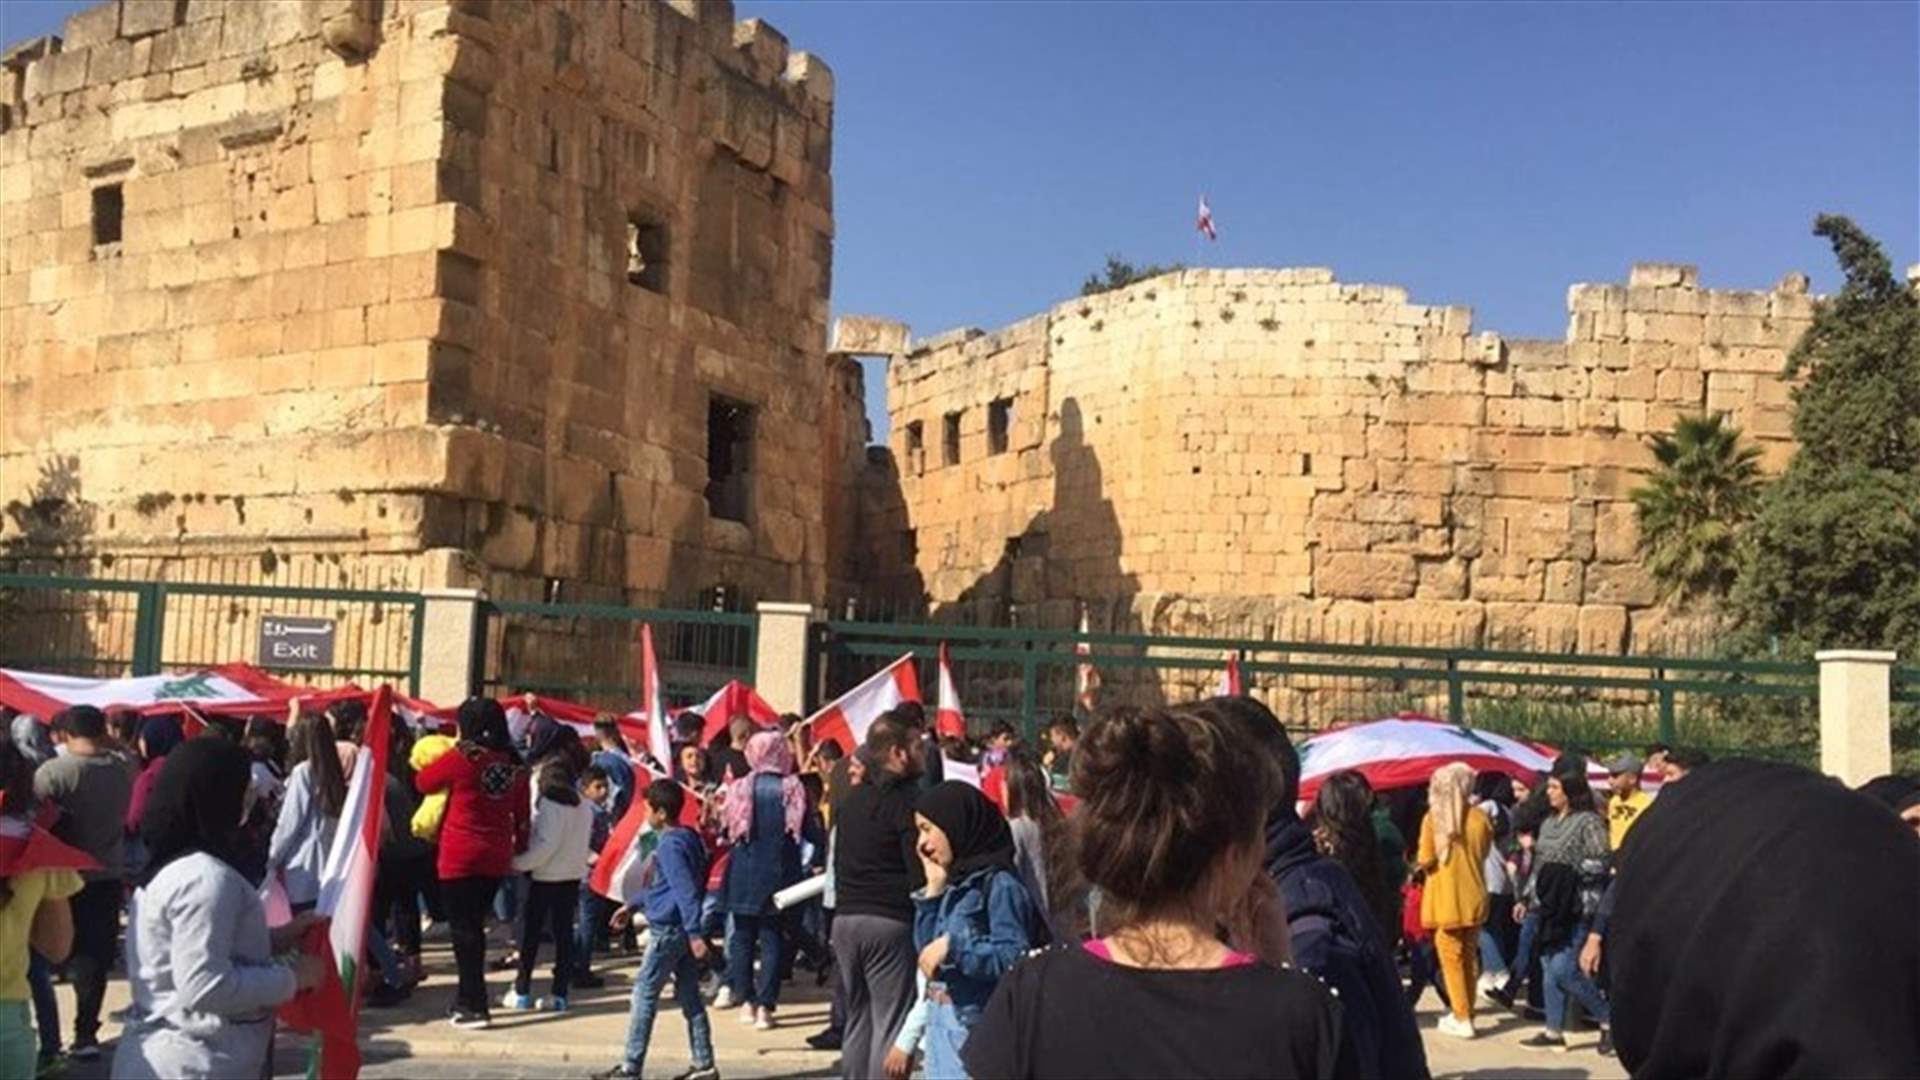 Protest staged outside Baalbek ruins (Video)